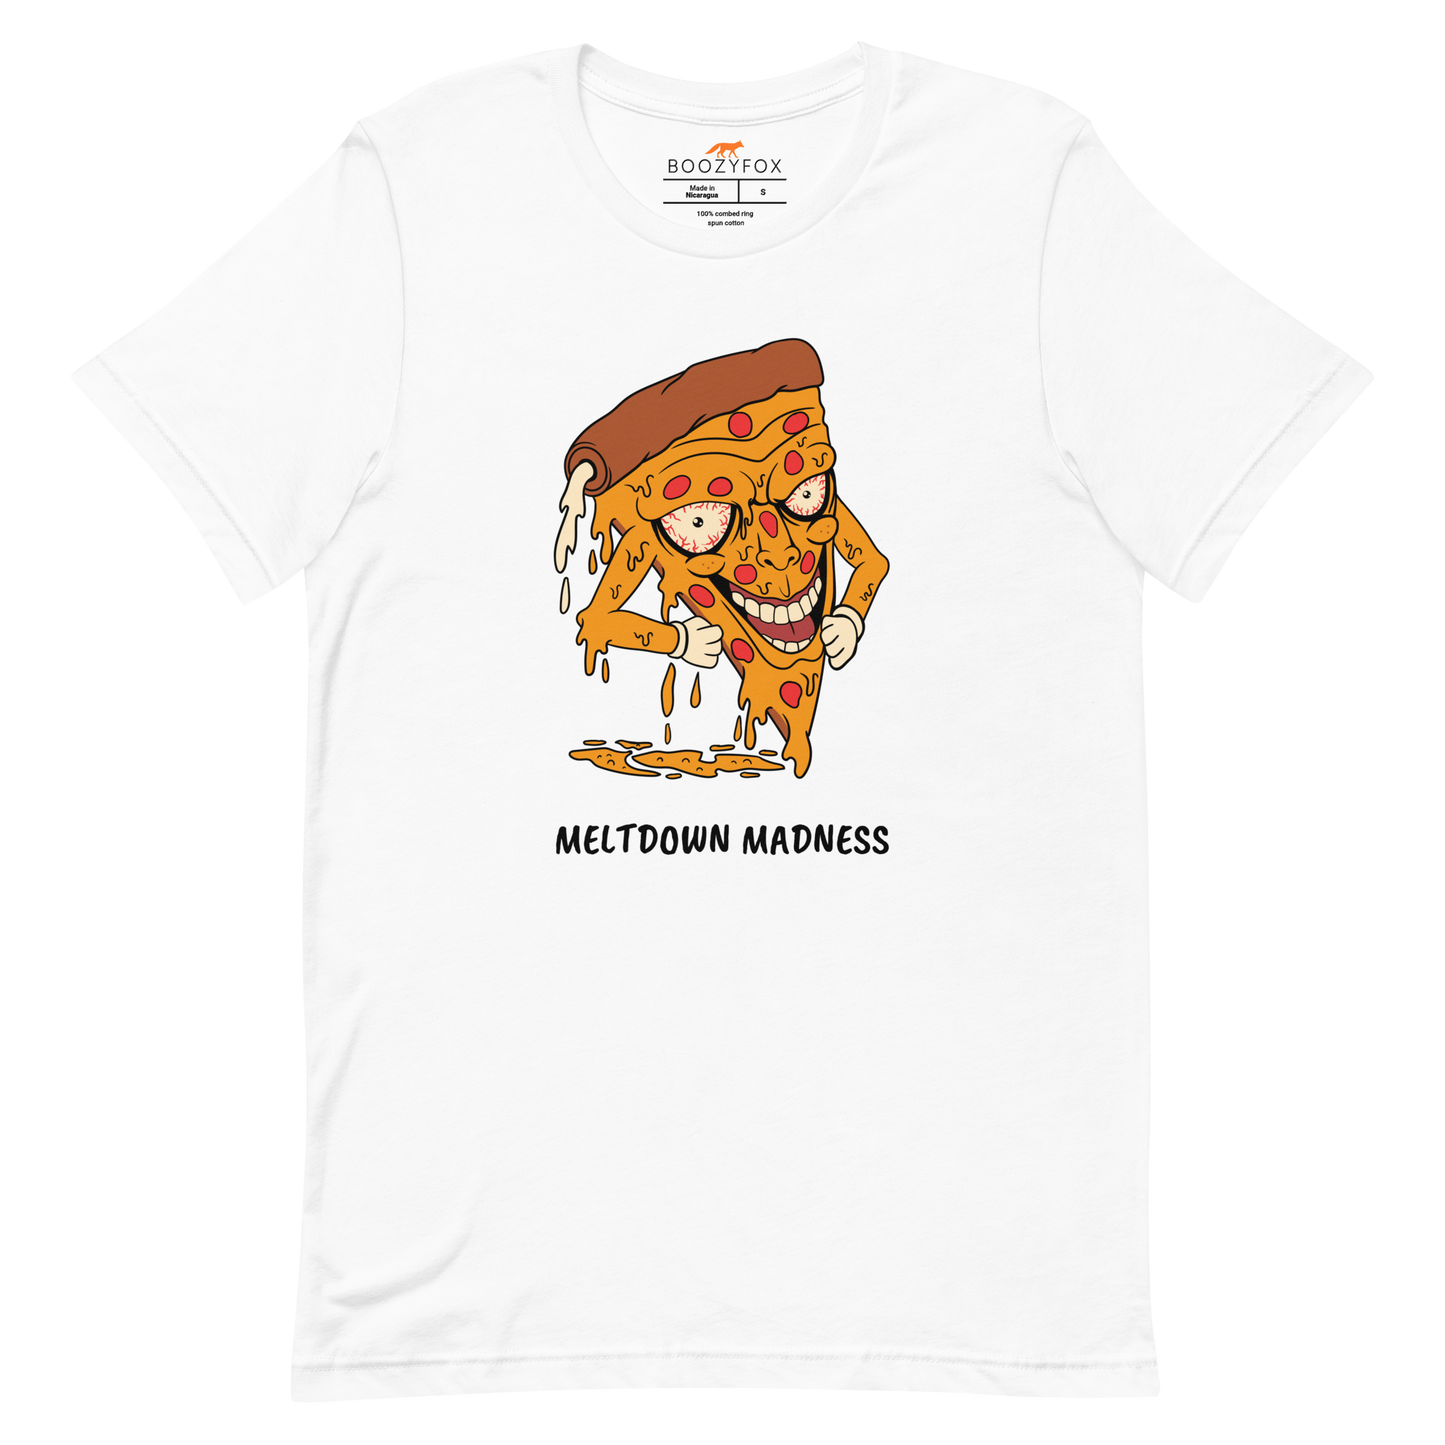 White Premium Melting Pizza Tee featuring a Meltdown Madness graphic on the chest - Funny Graphic Pizza Tees - Boozy Fox